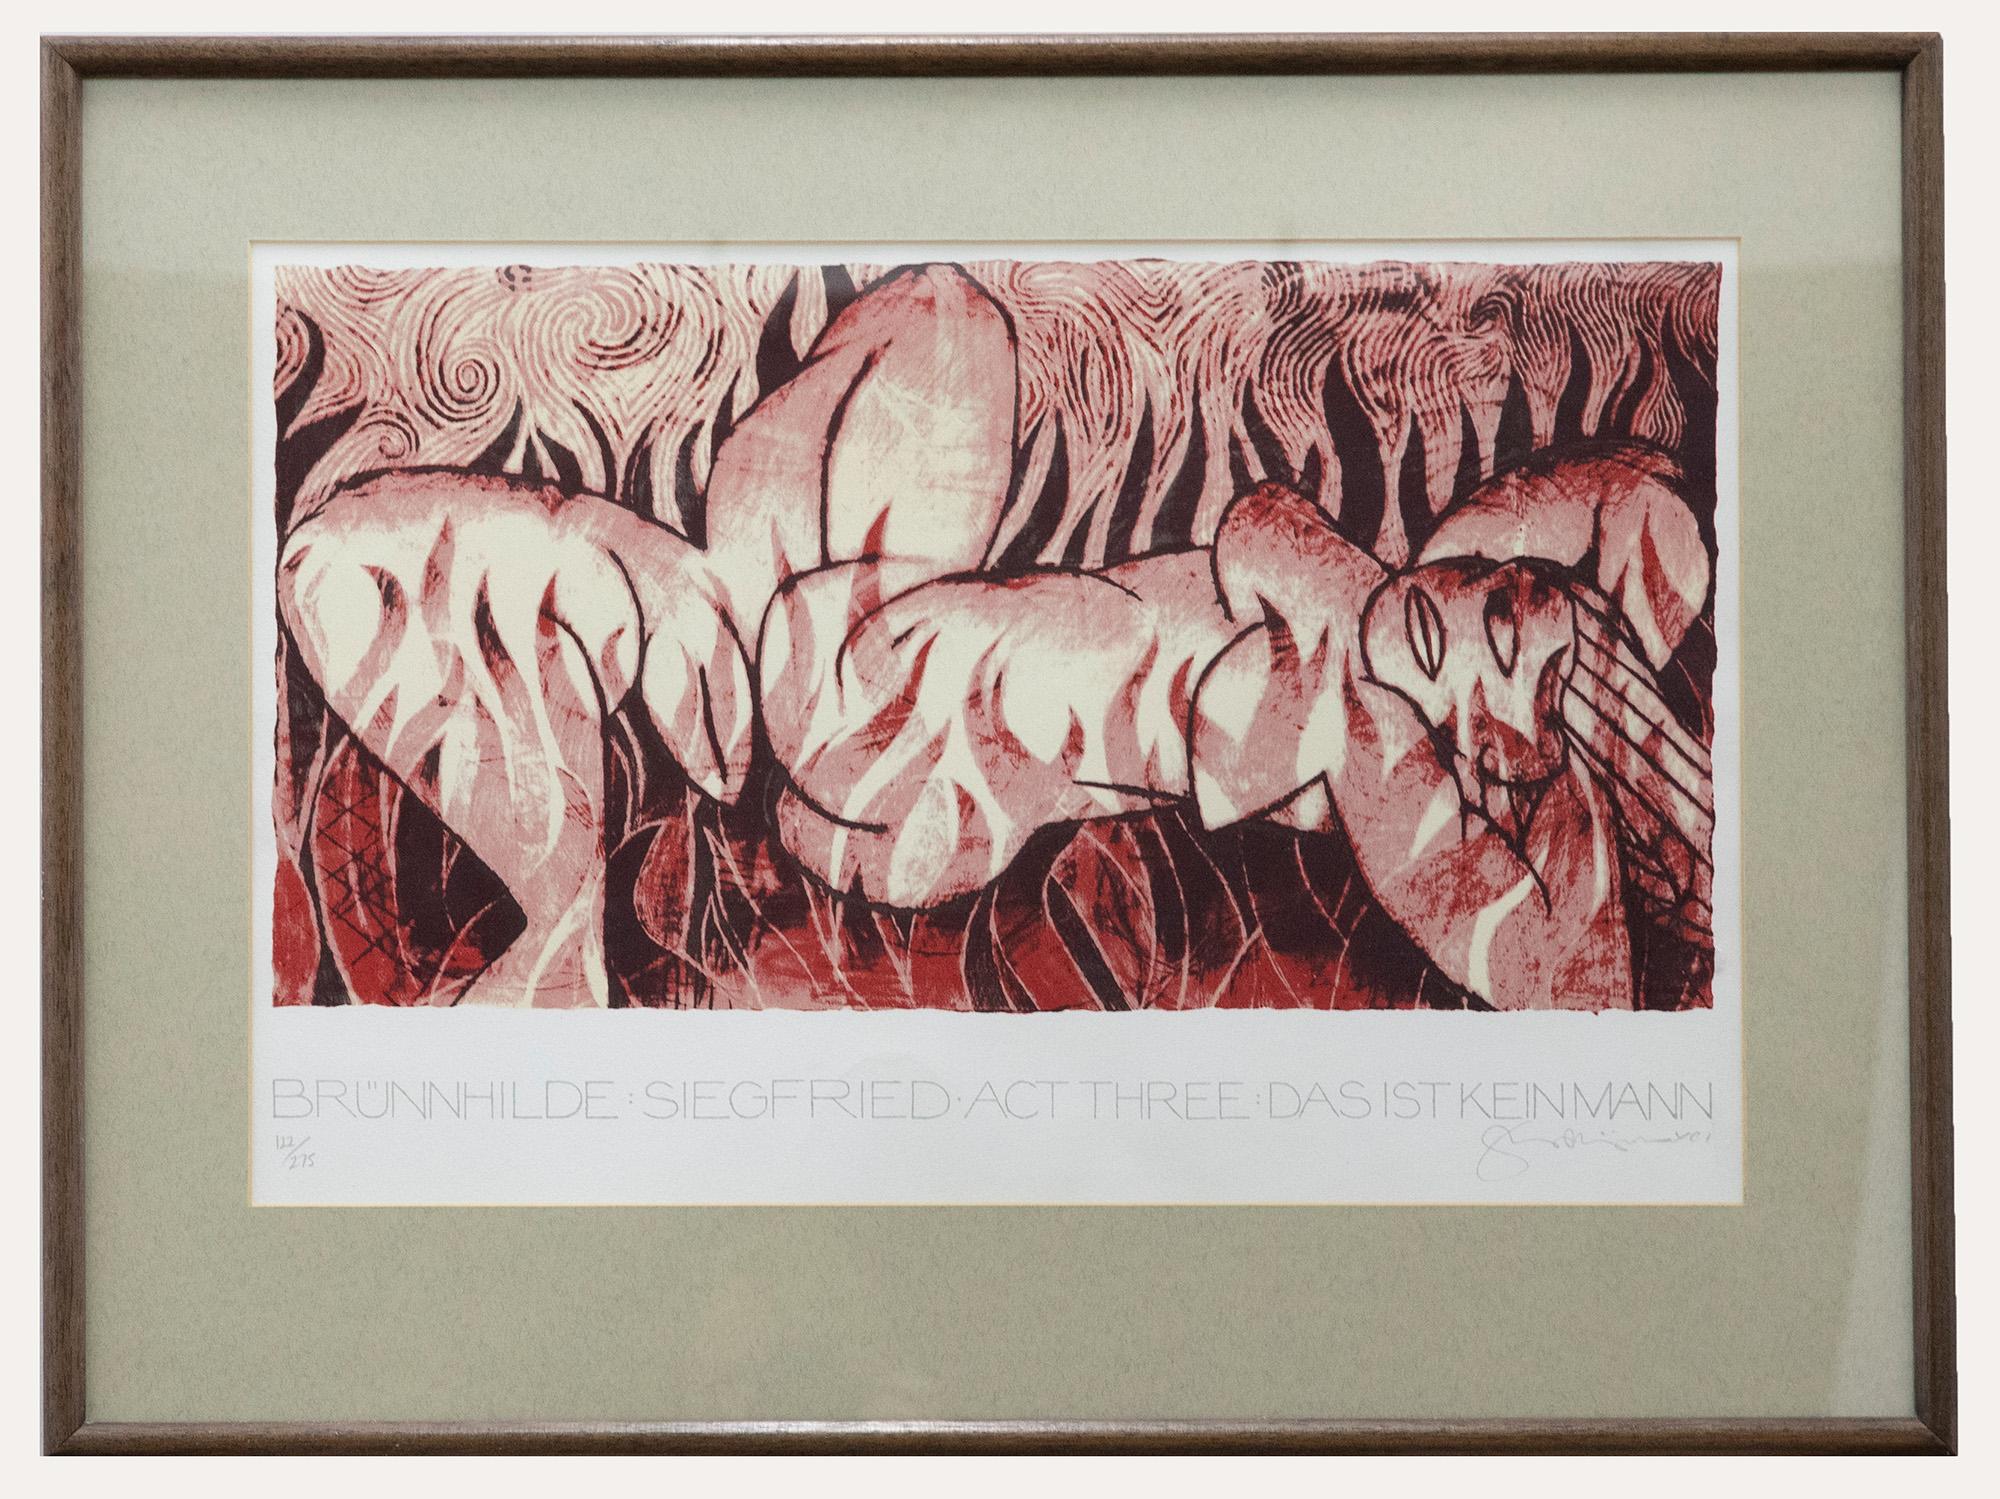 A striking silkscreen print with a creative interpretation of the story of Brunhilde and Siegfried. Inscribed to the lower border 'Brunhilde Siegfried Act Three Das Ist Keinmann'.Signed. 122/275. Presented in a wooden frame with a grey card mount.